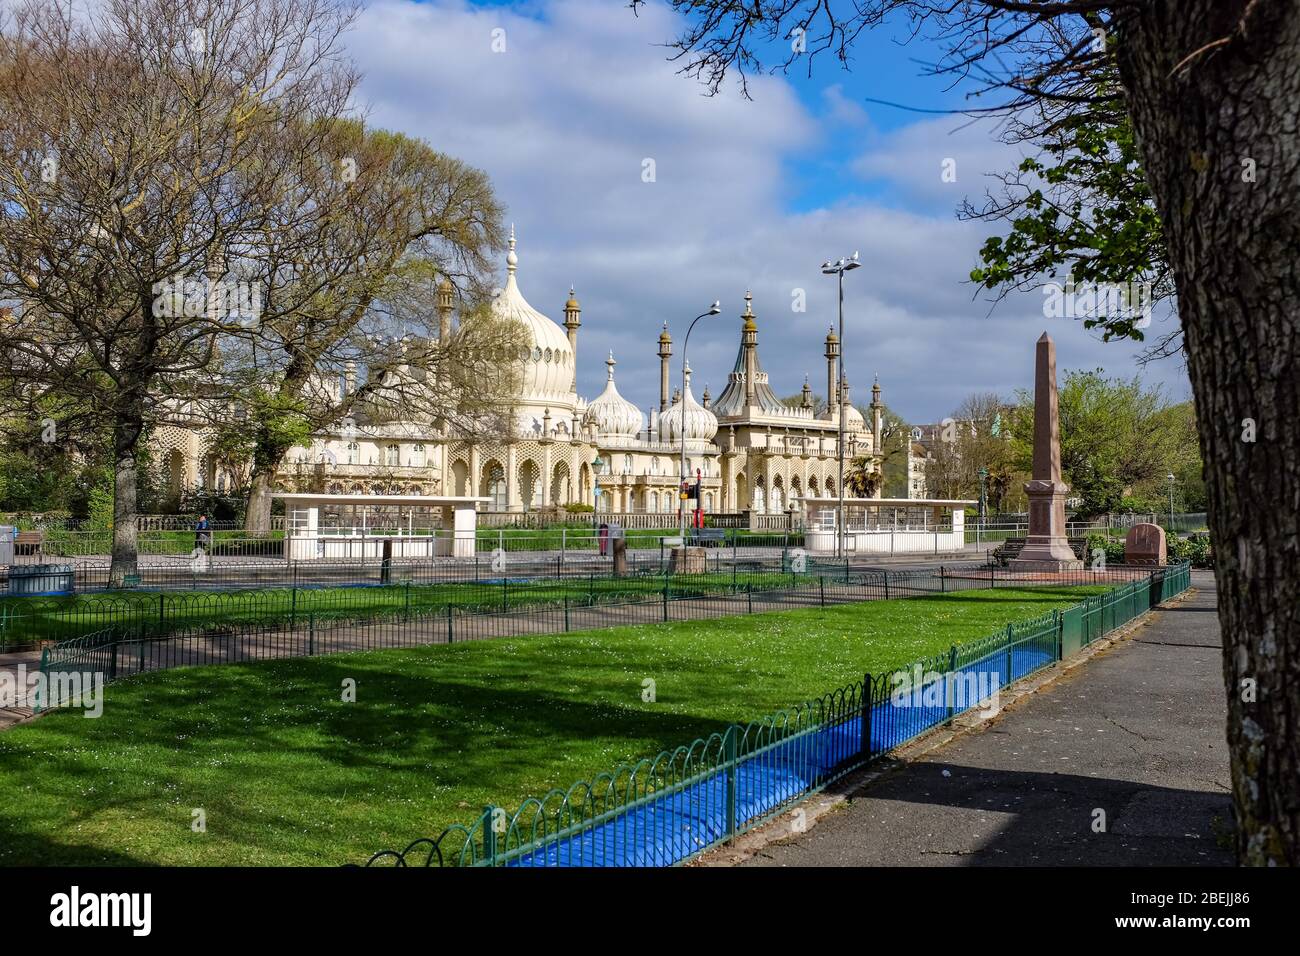 Brighton UK 14th April 2020 - The streets are empty of traffic around the Royal Pavilion in Brighton during the normally busy rush hour as lockdown continues in the UK  through the Coronavirus COVID-19 pandemic crisis  . Credit: Simon Dack / Alamy Live News Stock Photo